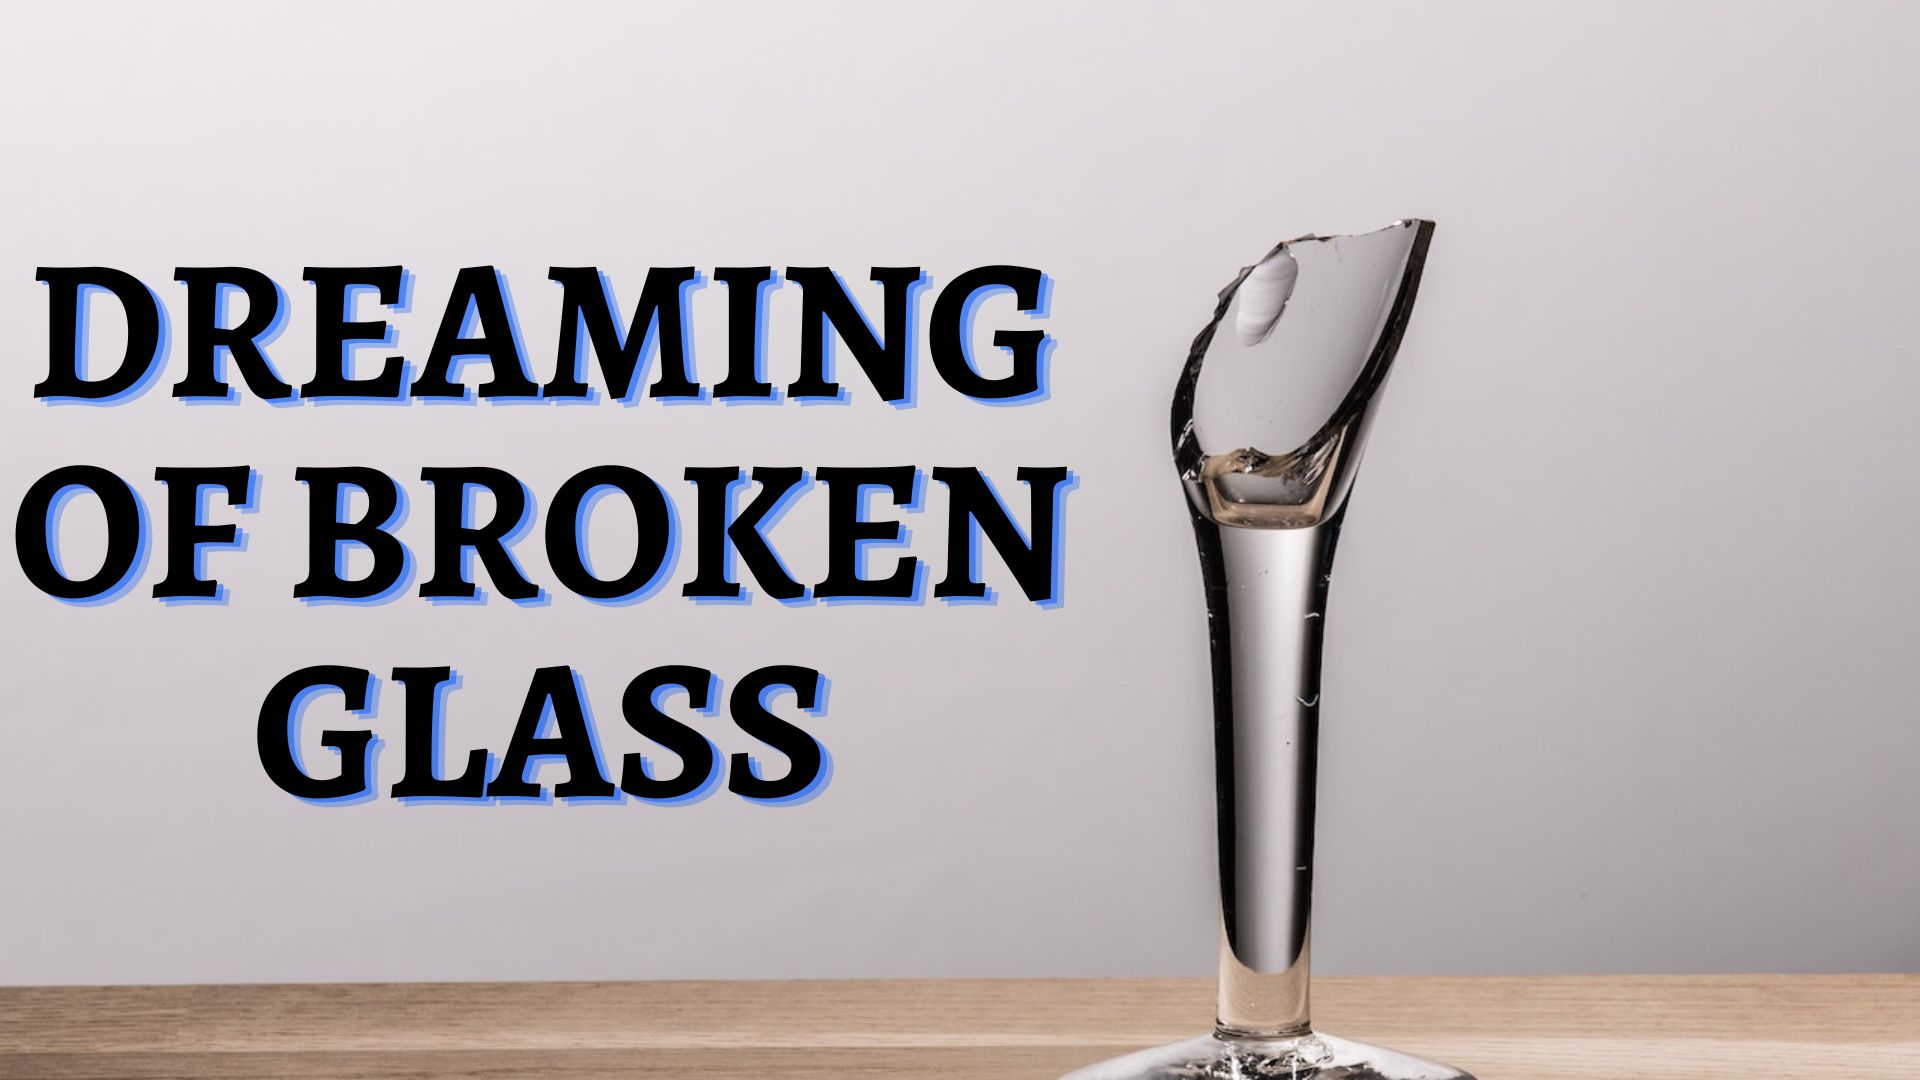 Dreaming Of Broken Glass - Related To Negativities, Dissatisfaction, And Bad Luck